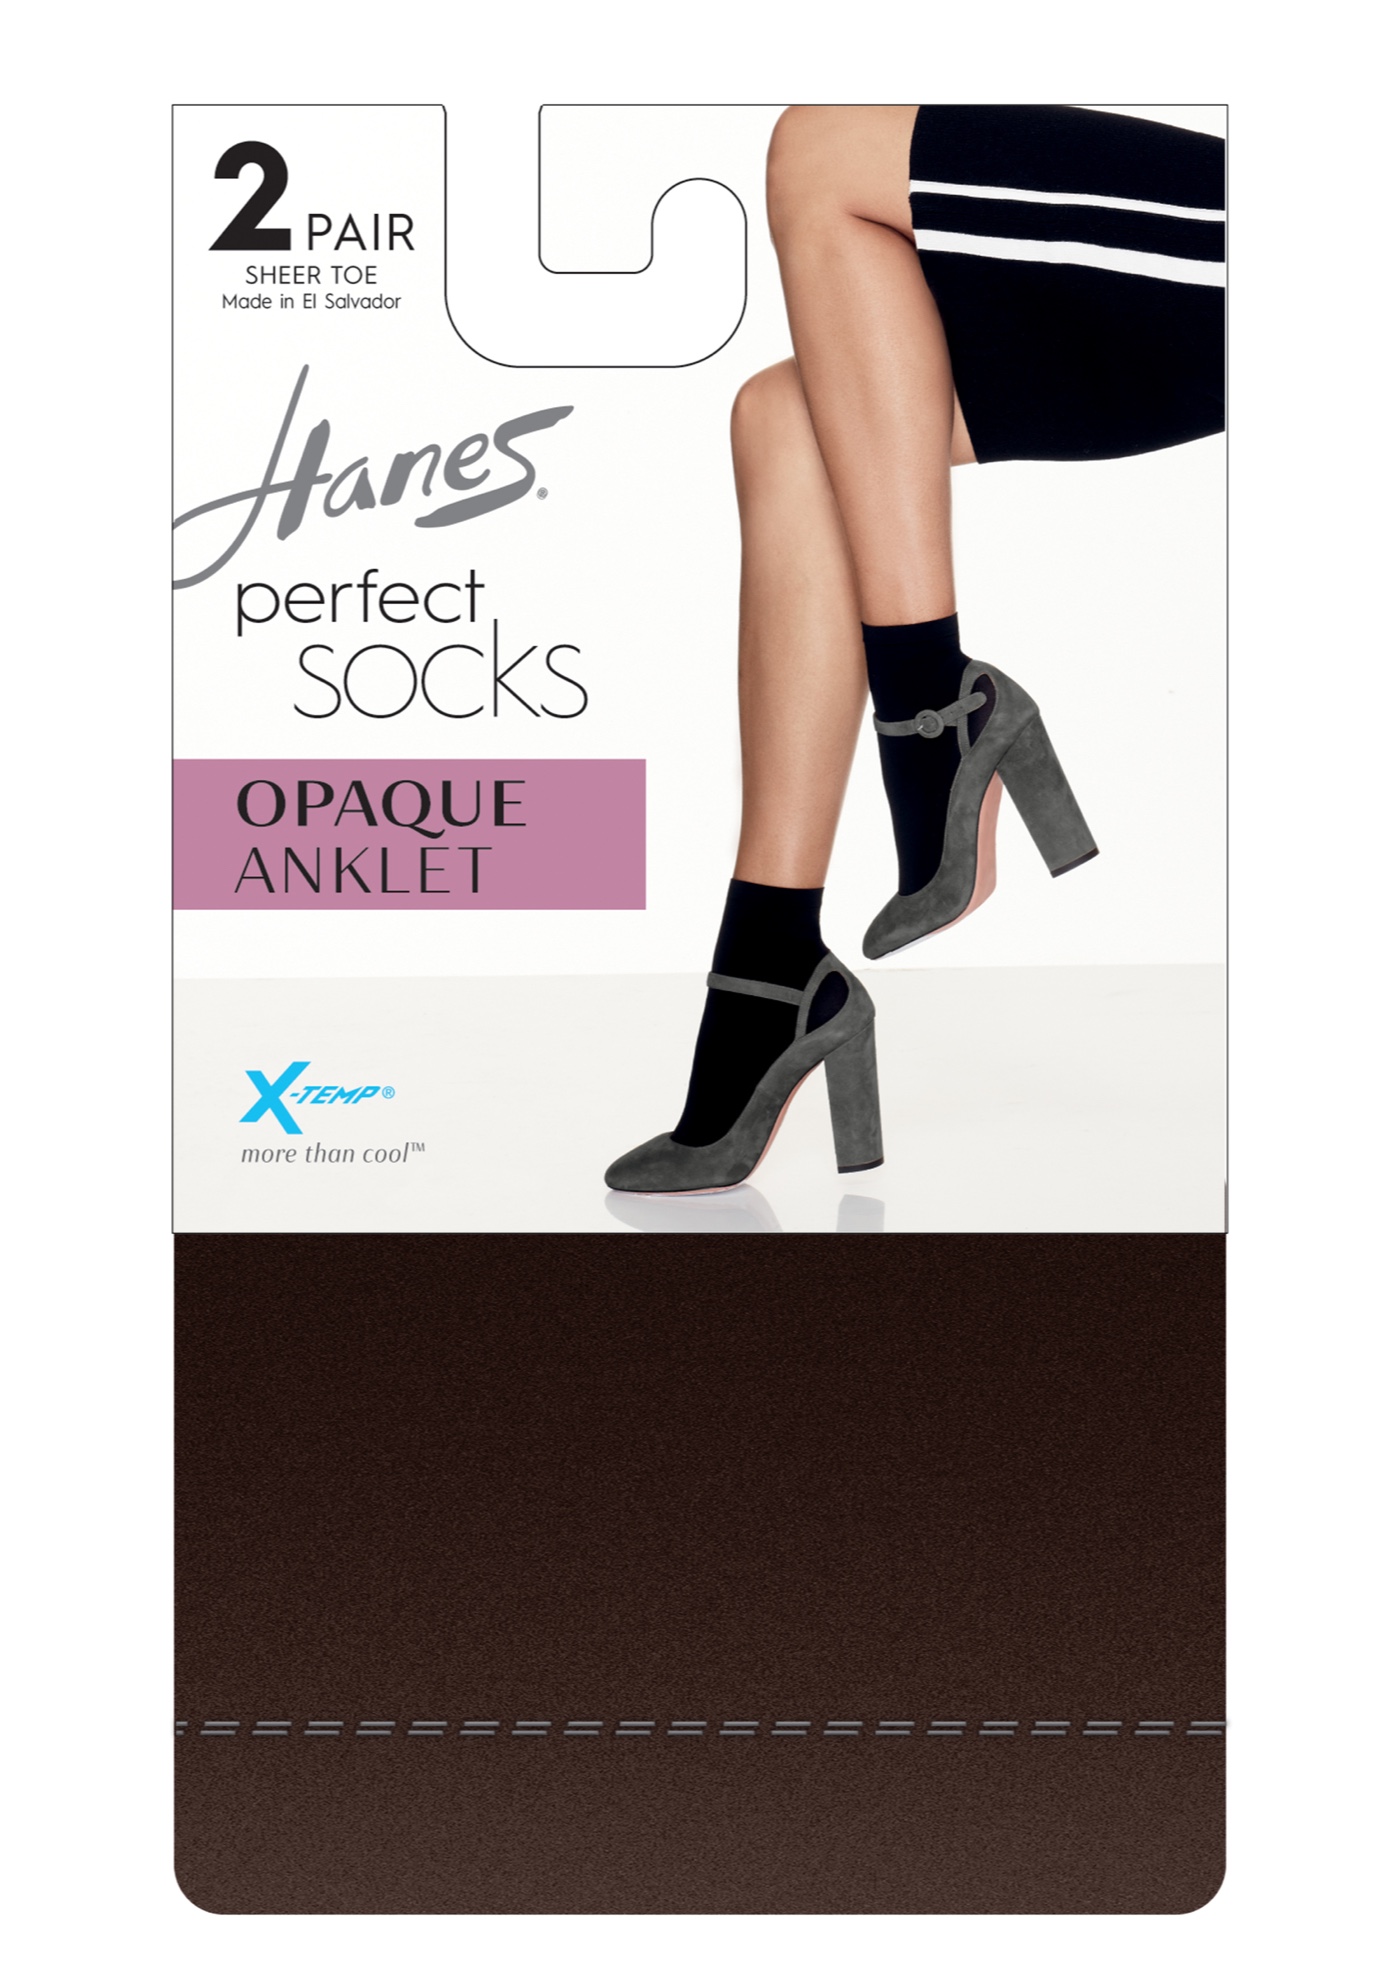 Perfect Socks Opaque Anklet P2 ST, 